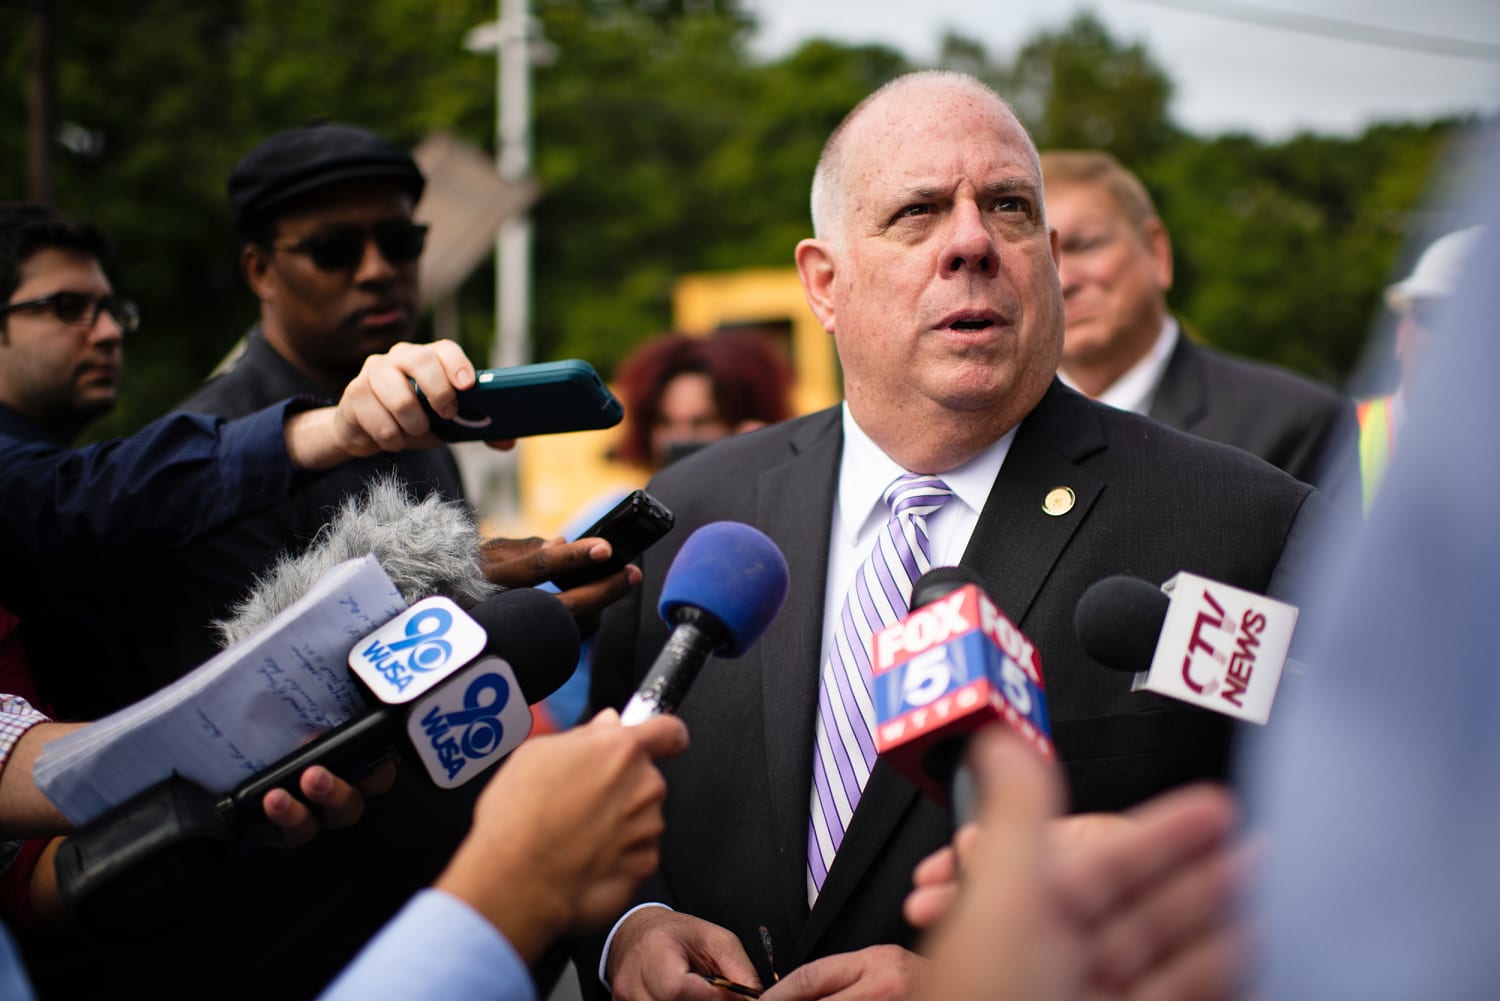 junk Imagination Give Maryland Gov. Larry Hogan emerges as a leader in early action on coronavirus